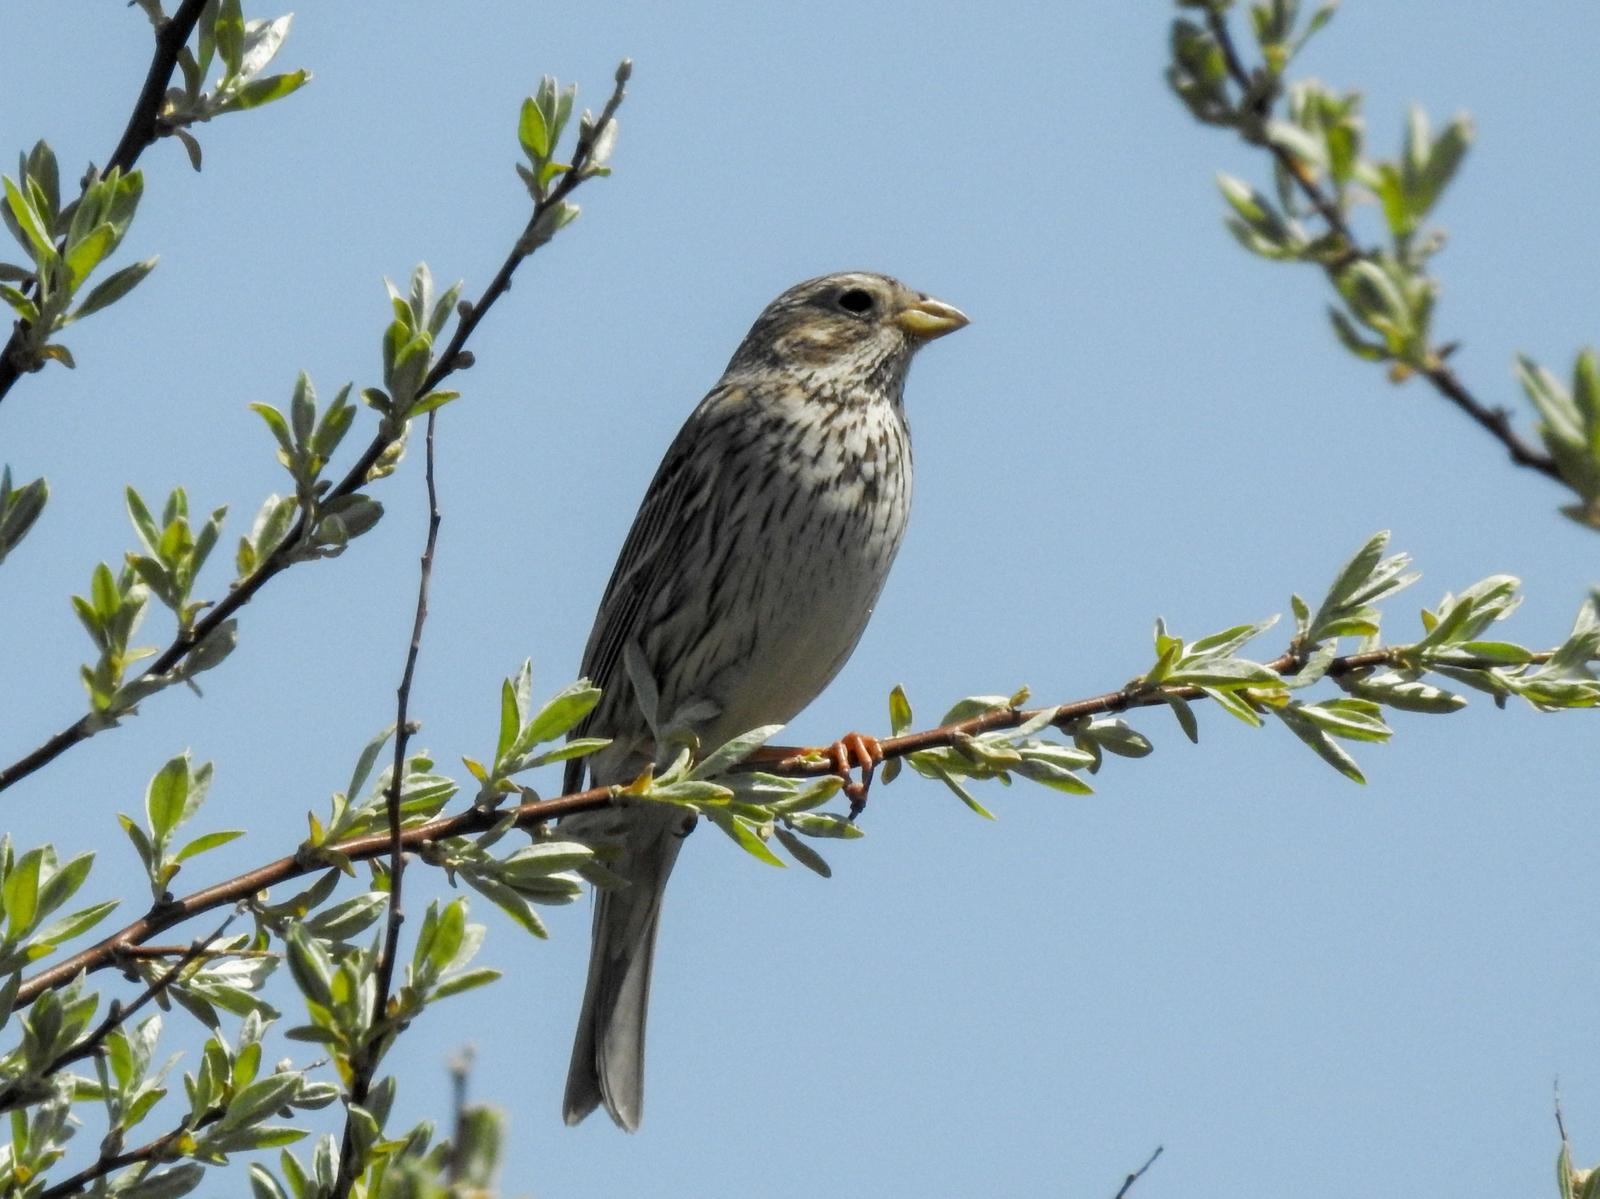 Corn Bunting Photo by African Googre